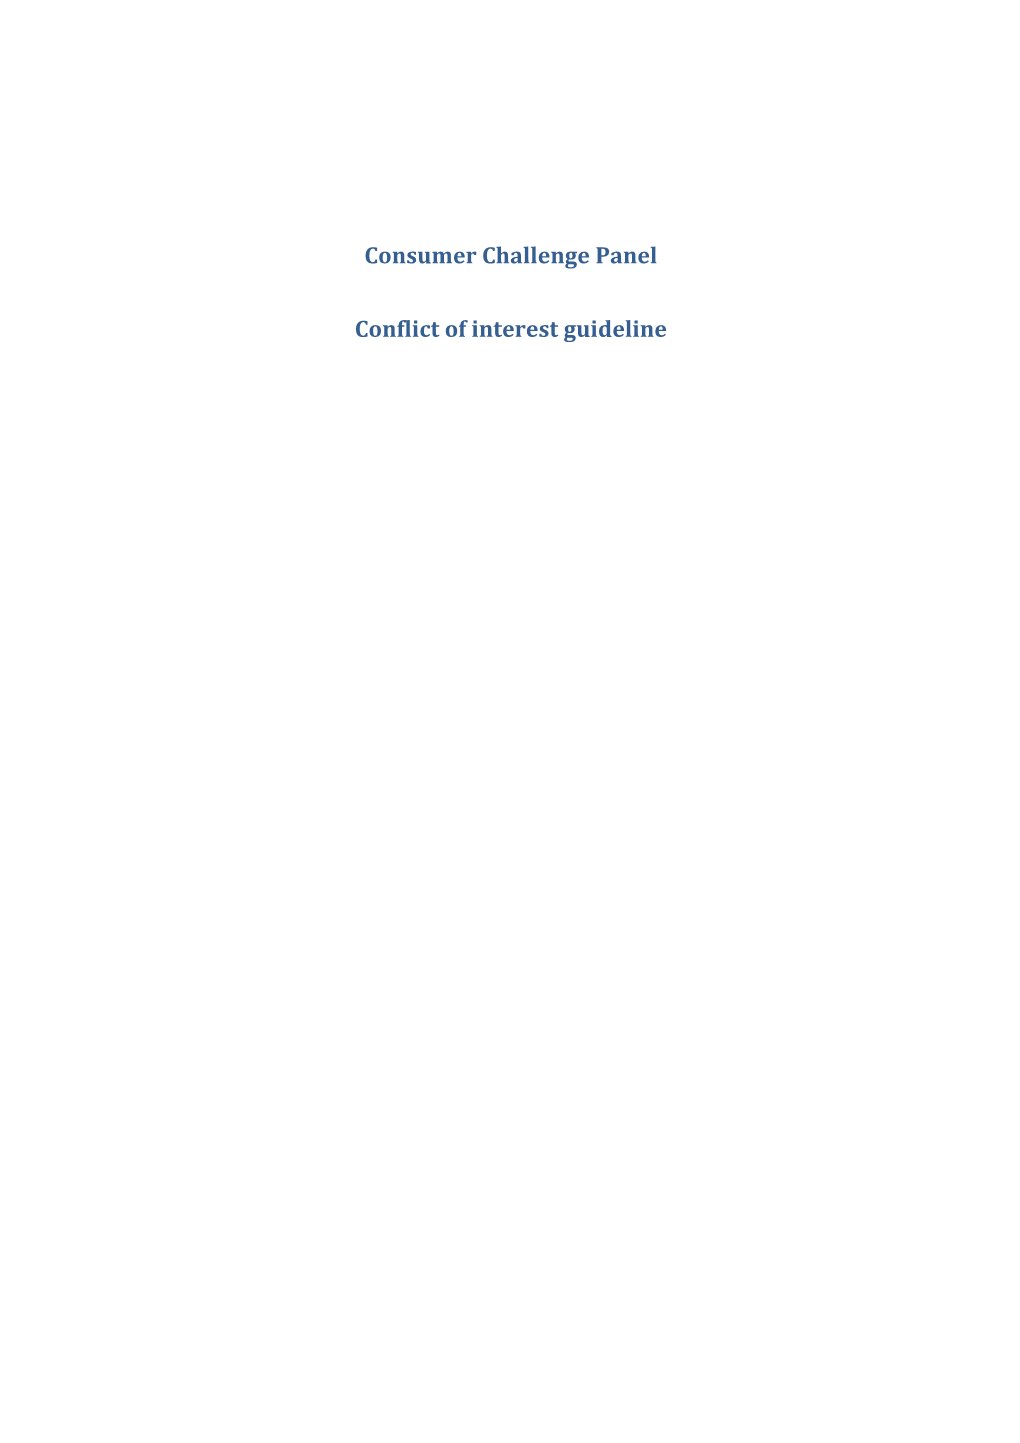 Consumer Challenge Panel (CCP) - Conflict of Interest Guideline - 2017